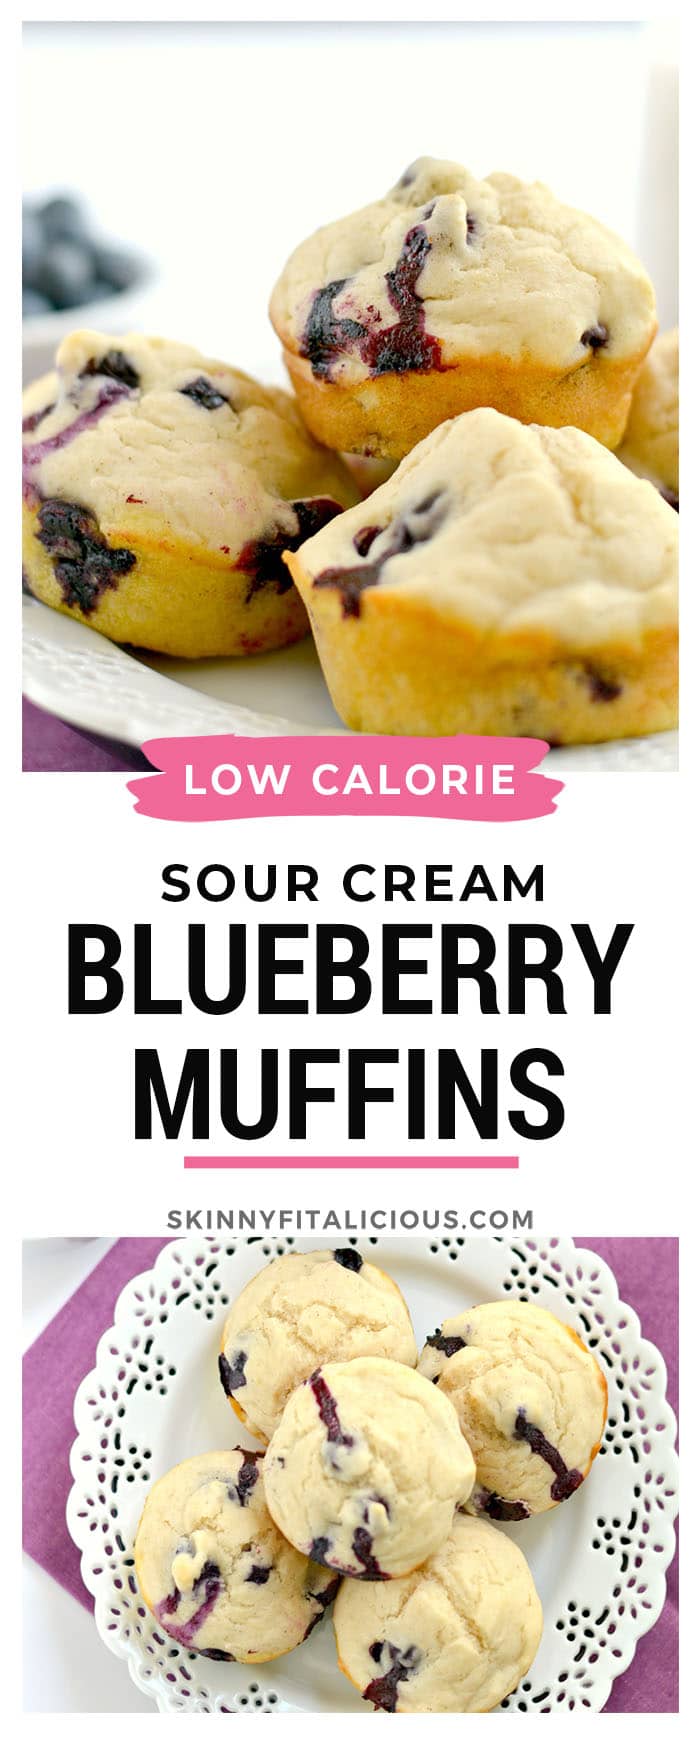 Sour Cream Blueberry Muffins! Made lighter with sour cream, applesauce, dairy-free milk, and gluten free flour, these delicious low calorie muffins are perfect for starting your day. Gluten Free + Low Calorie